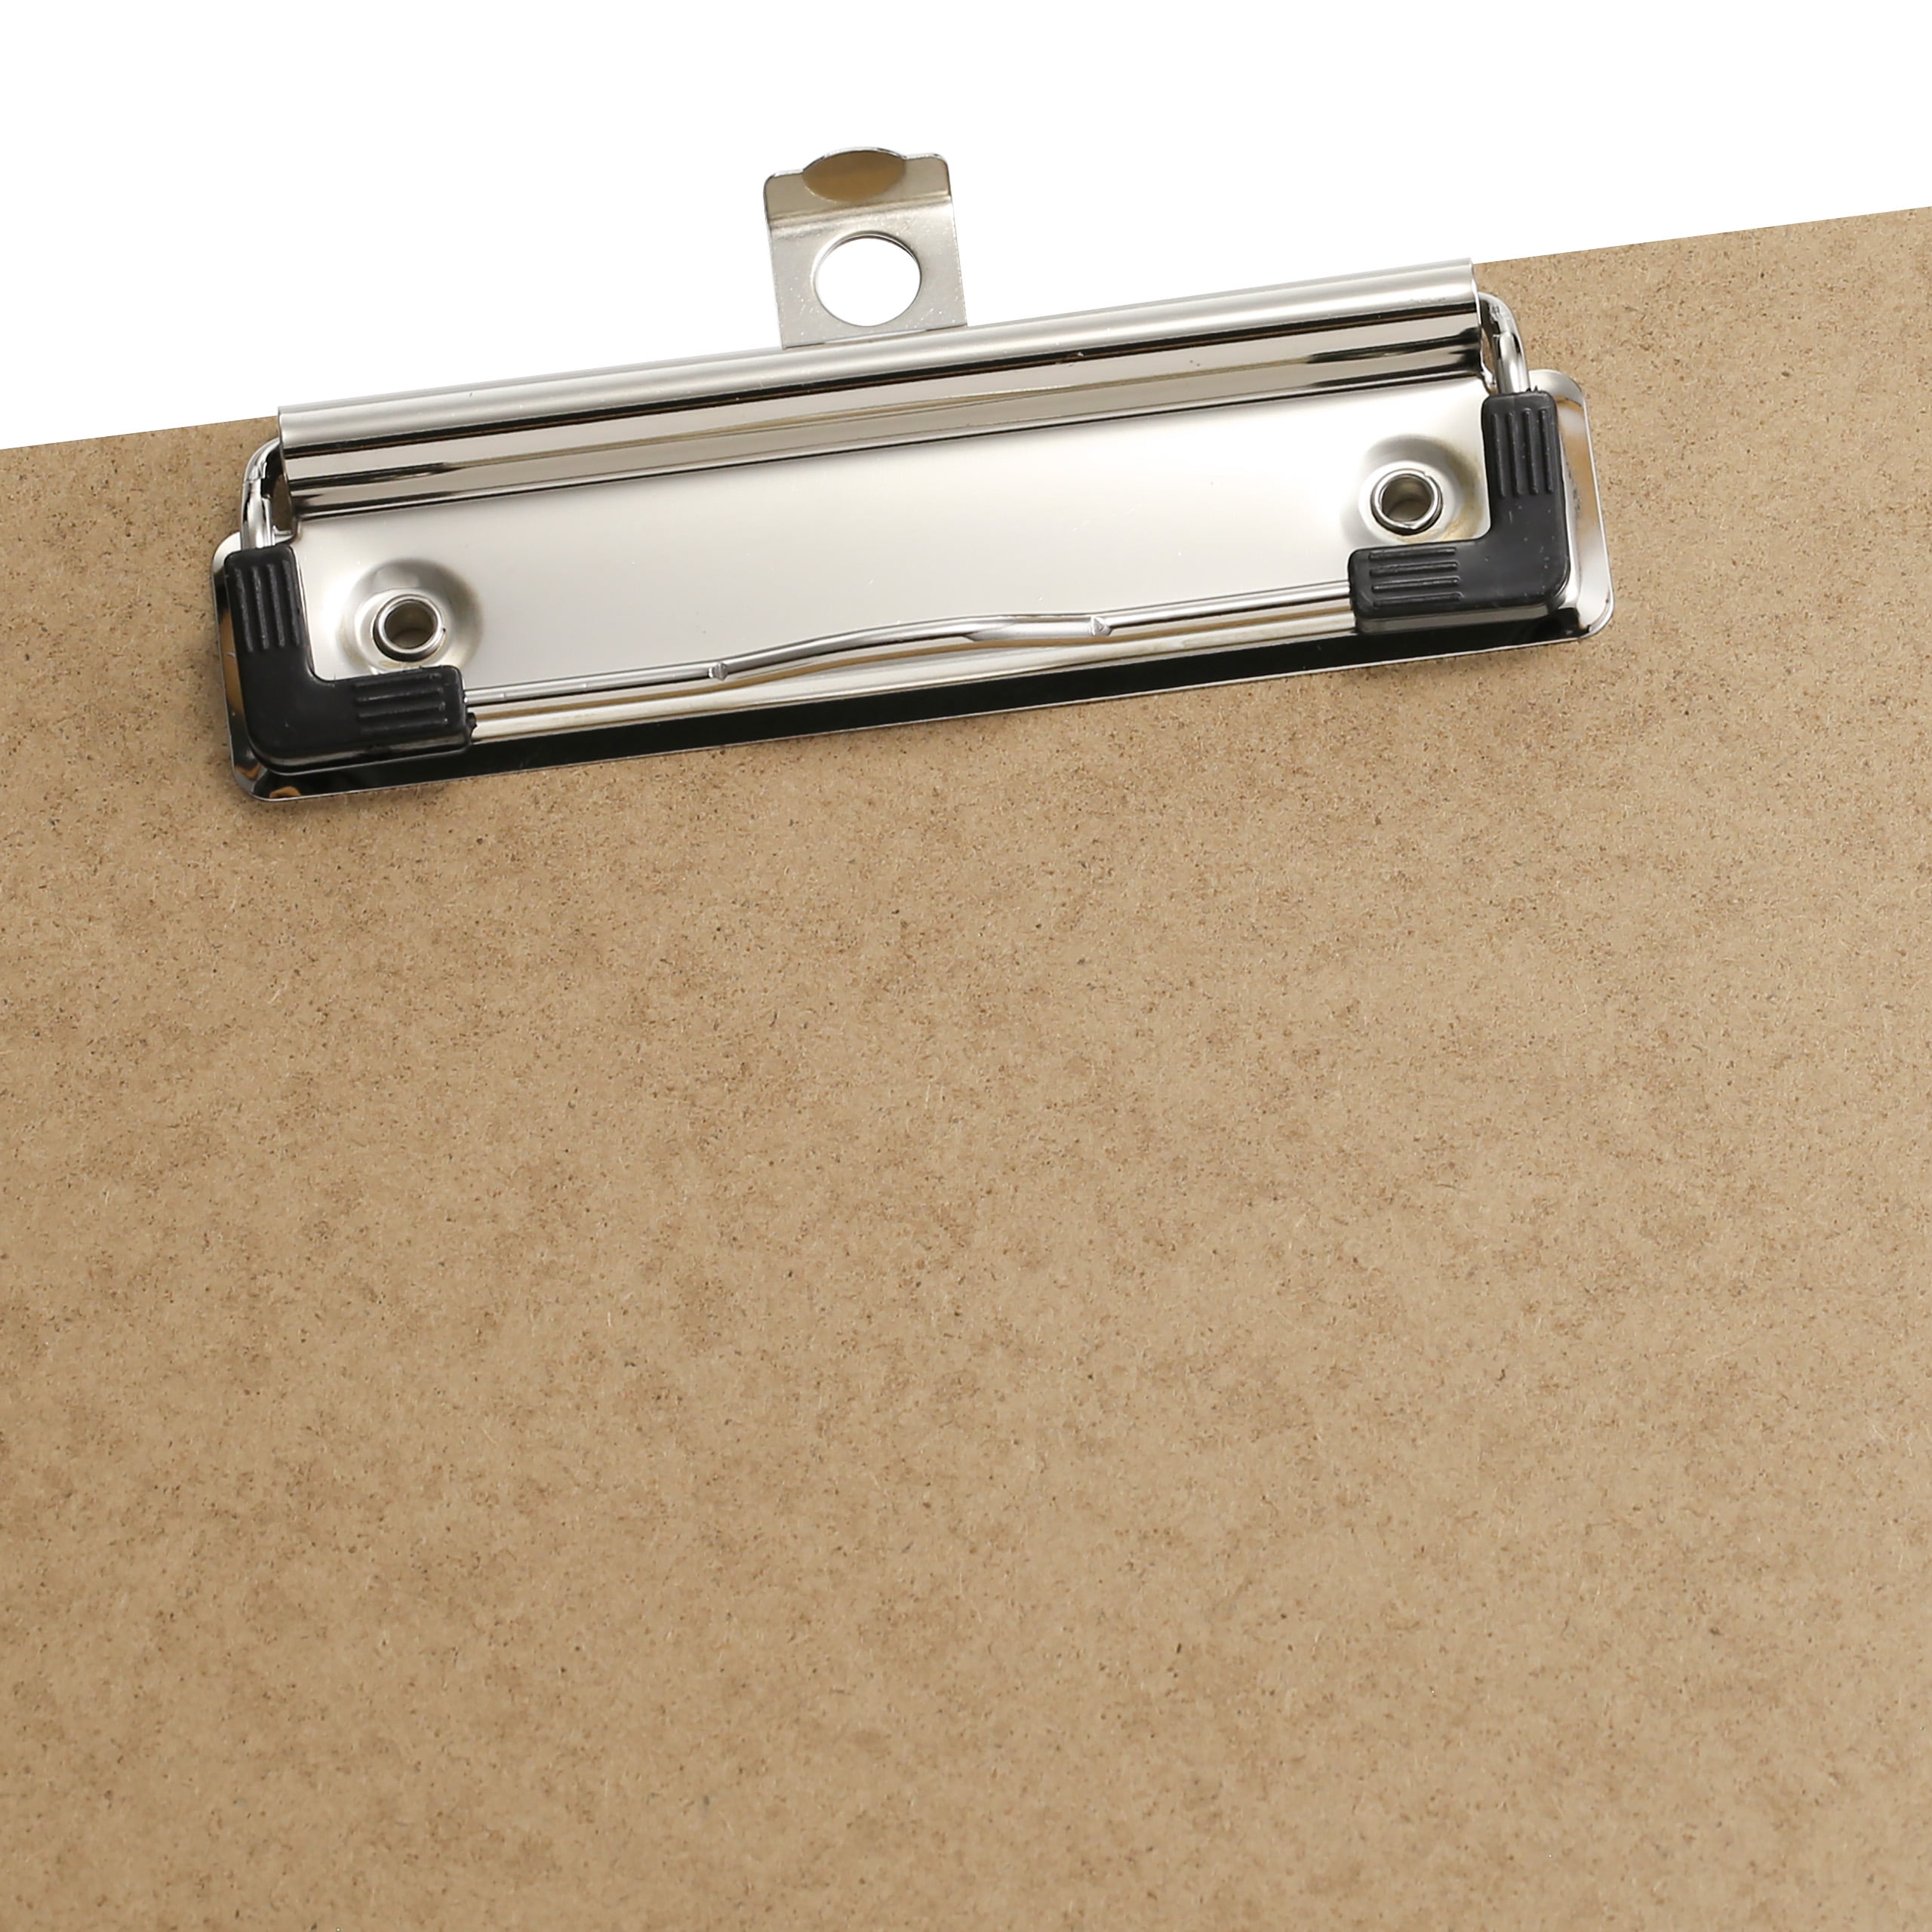 Officemate Recycled Wood Clipboard, Letter Size, 9 x 12.5 with 6 Clip, 3  Pack (83133),Brown